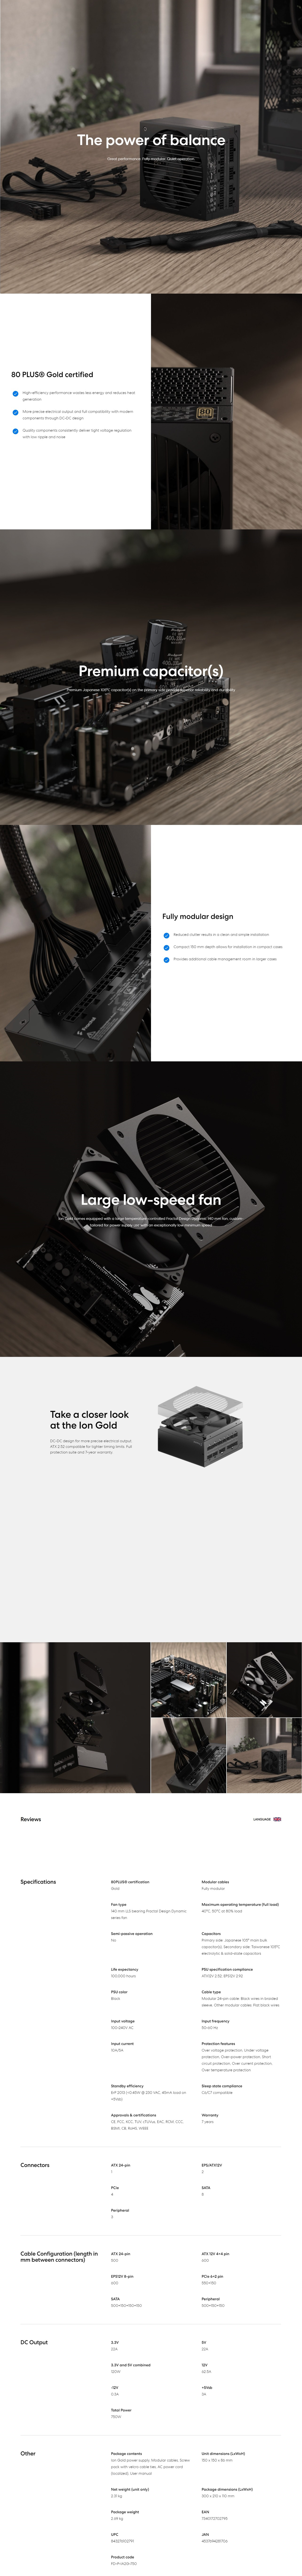 A large marketing image providing additional information about the product Fractal Design Ion 750W Gold ATX Modular PSU - Additional alt info not provided